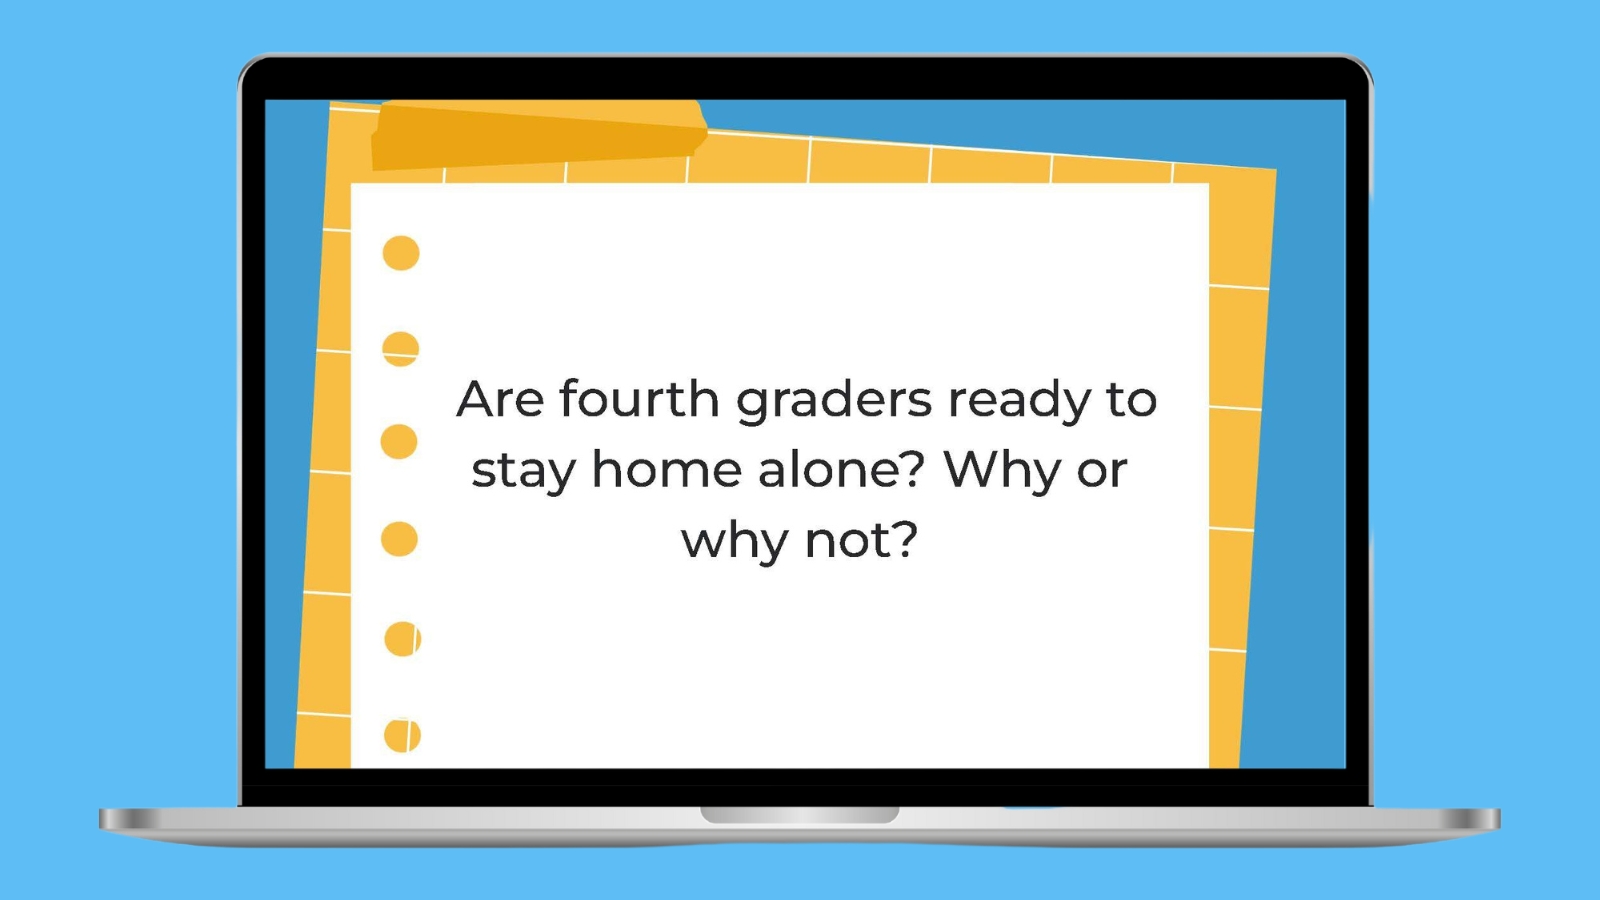 Are fourth graders ready to stay home alone? Why or why not?